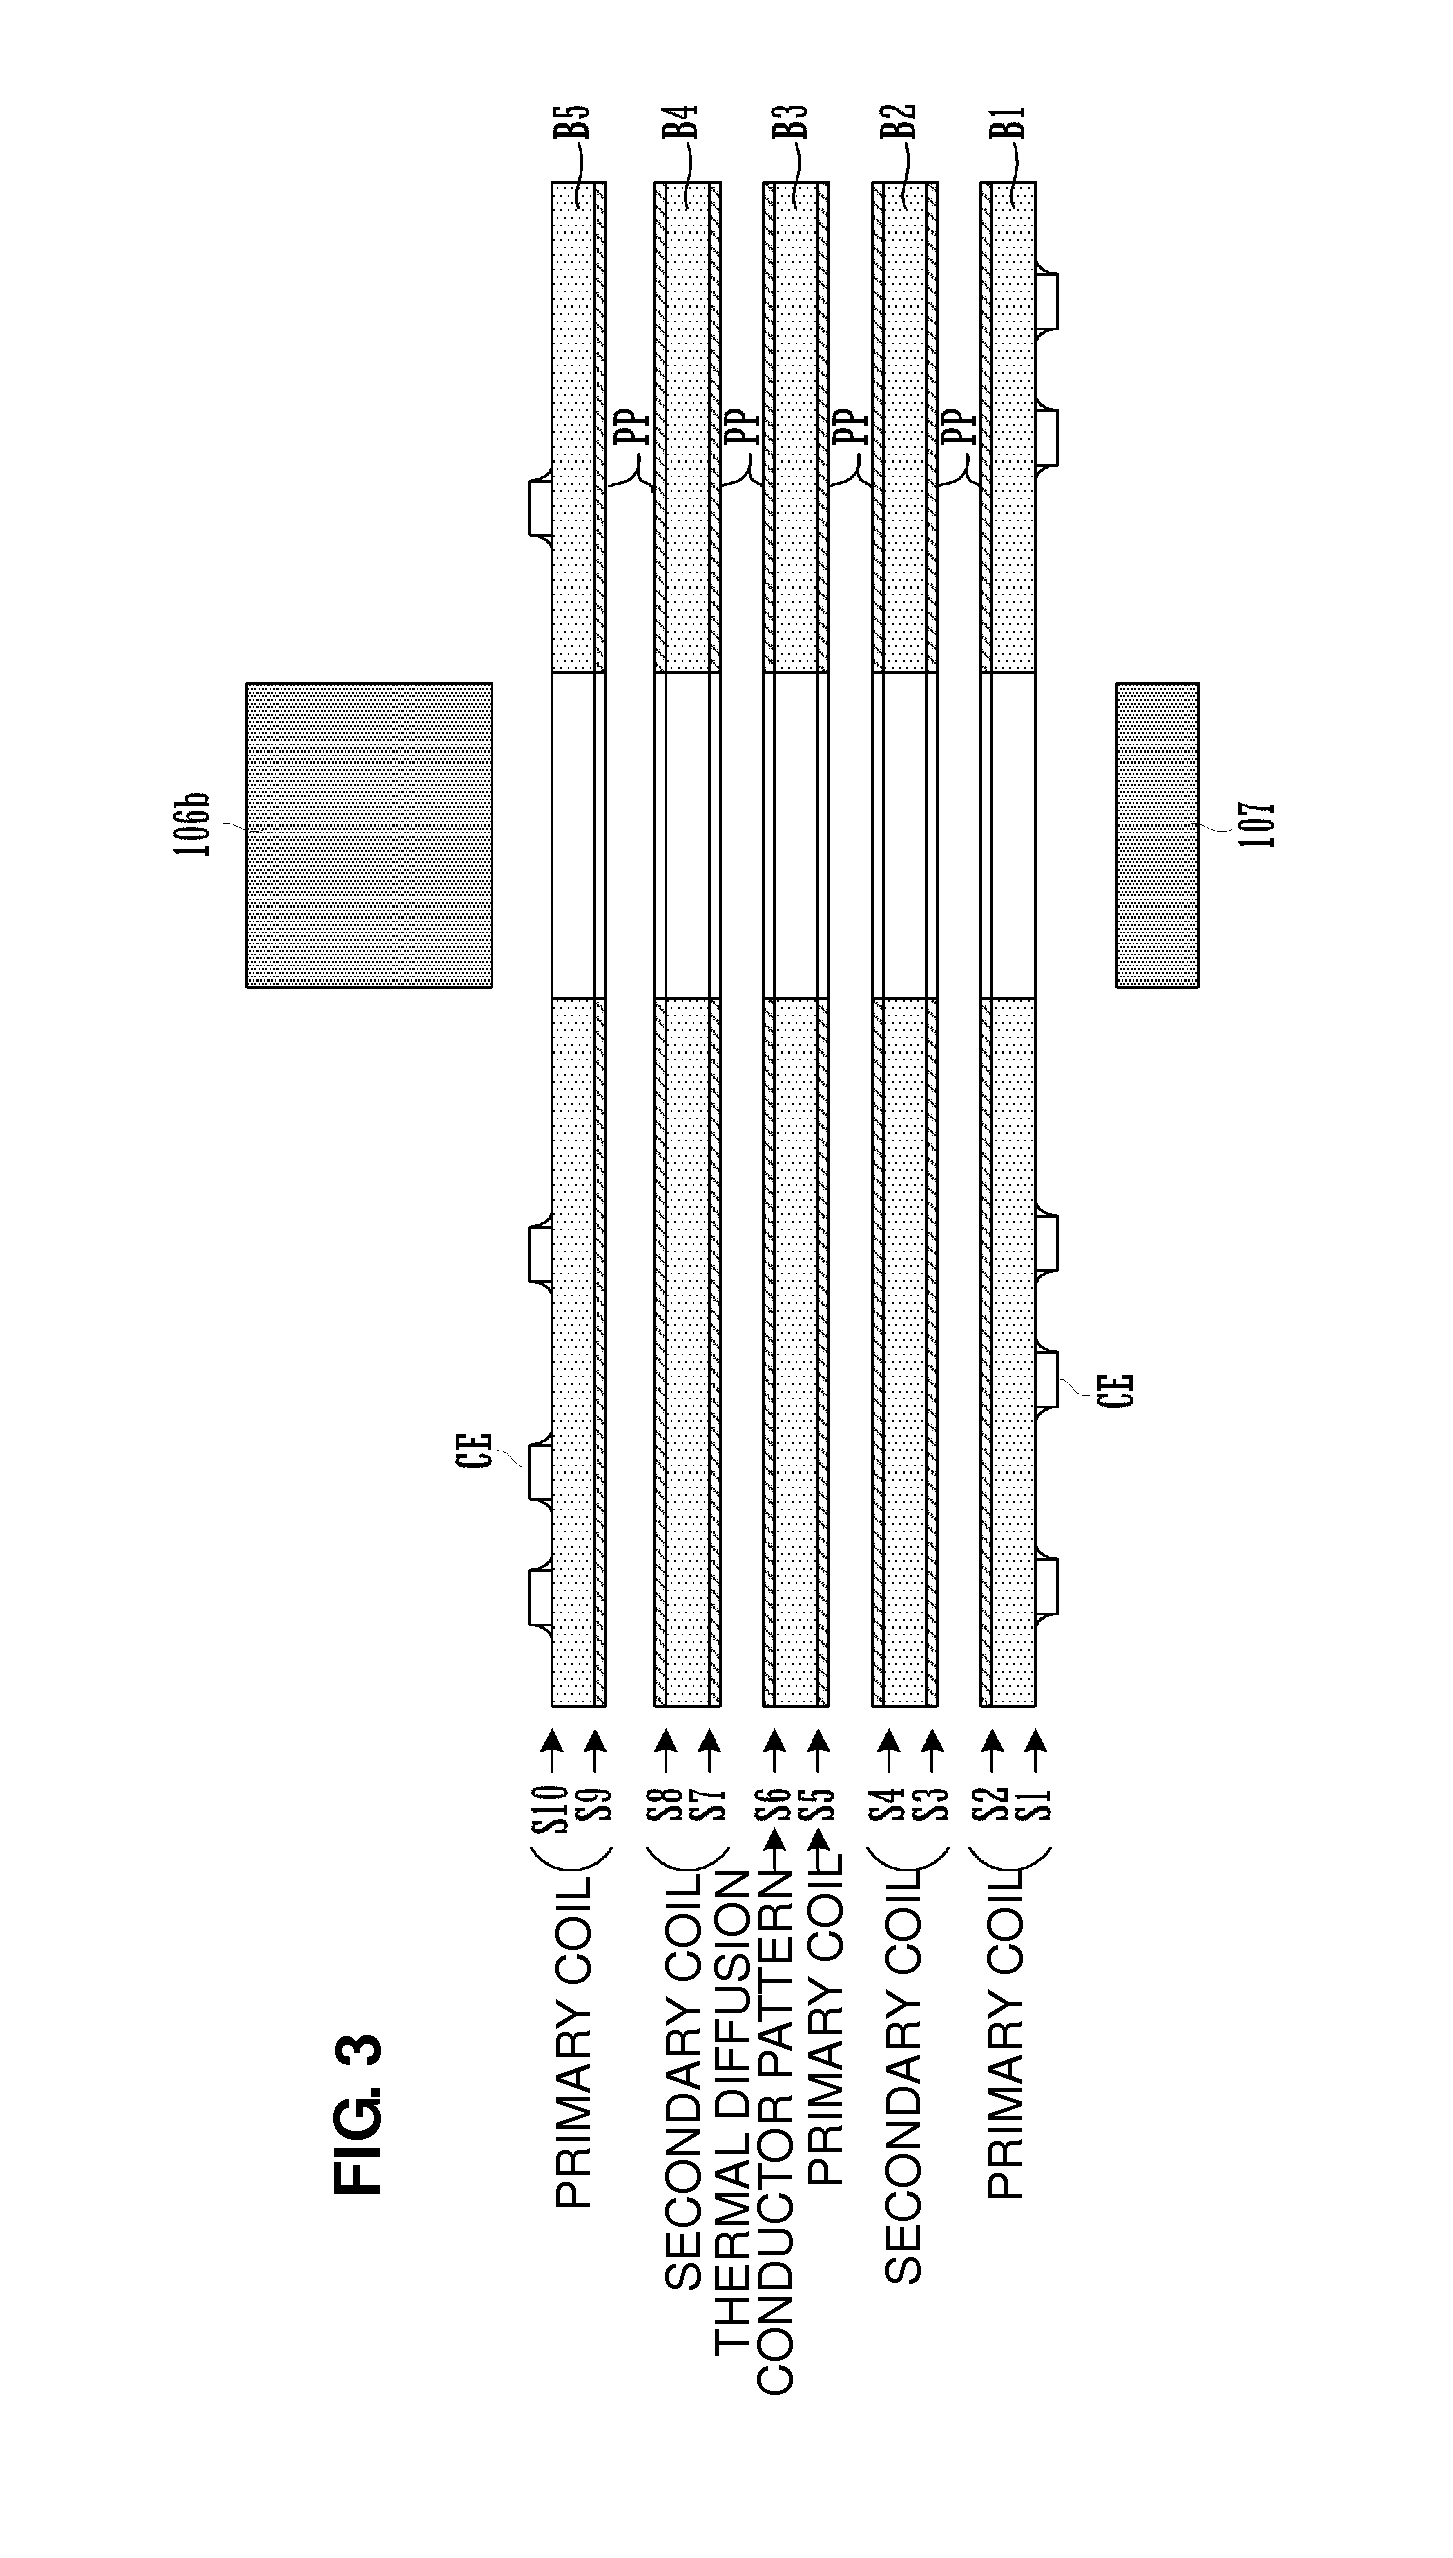 Coil-integrated switching power supply module